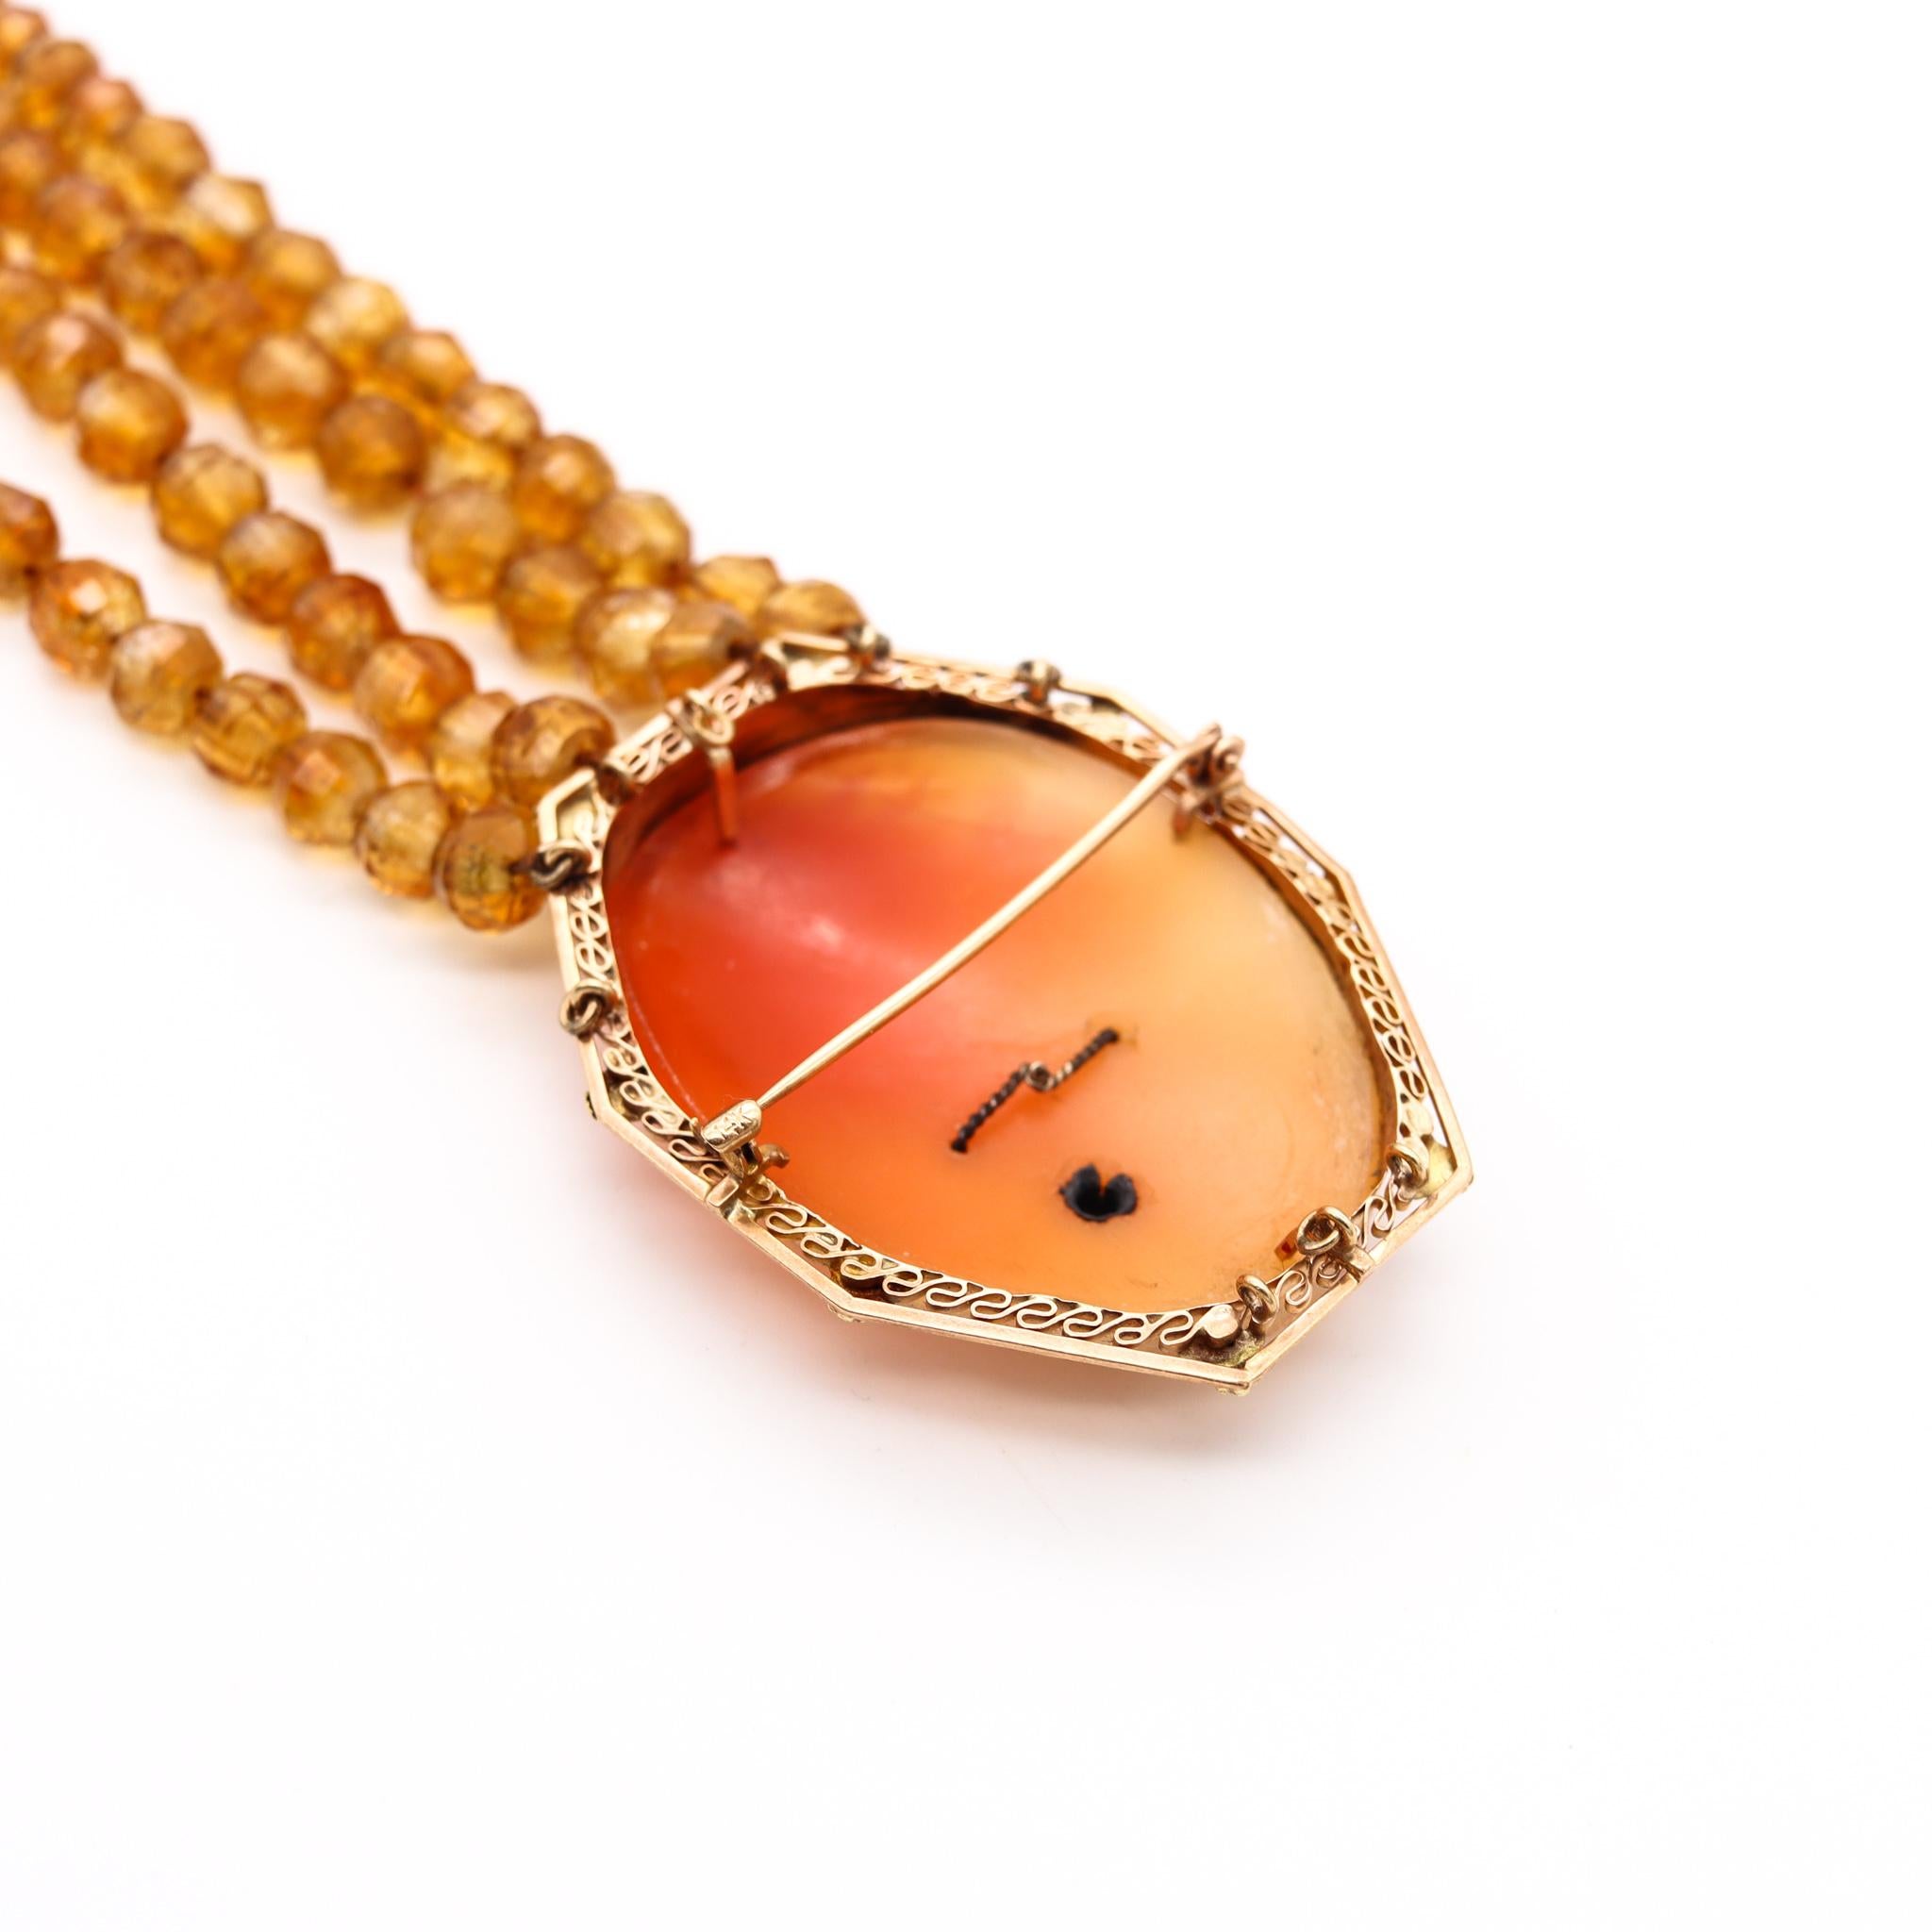 Bead Art Deco 1930 Italy Antique Cameo Necklace 14Kt Yellow Gold With Carved Citrines For Sale